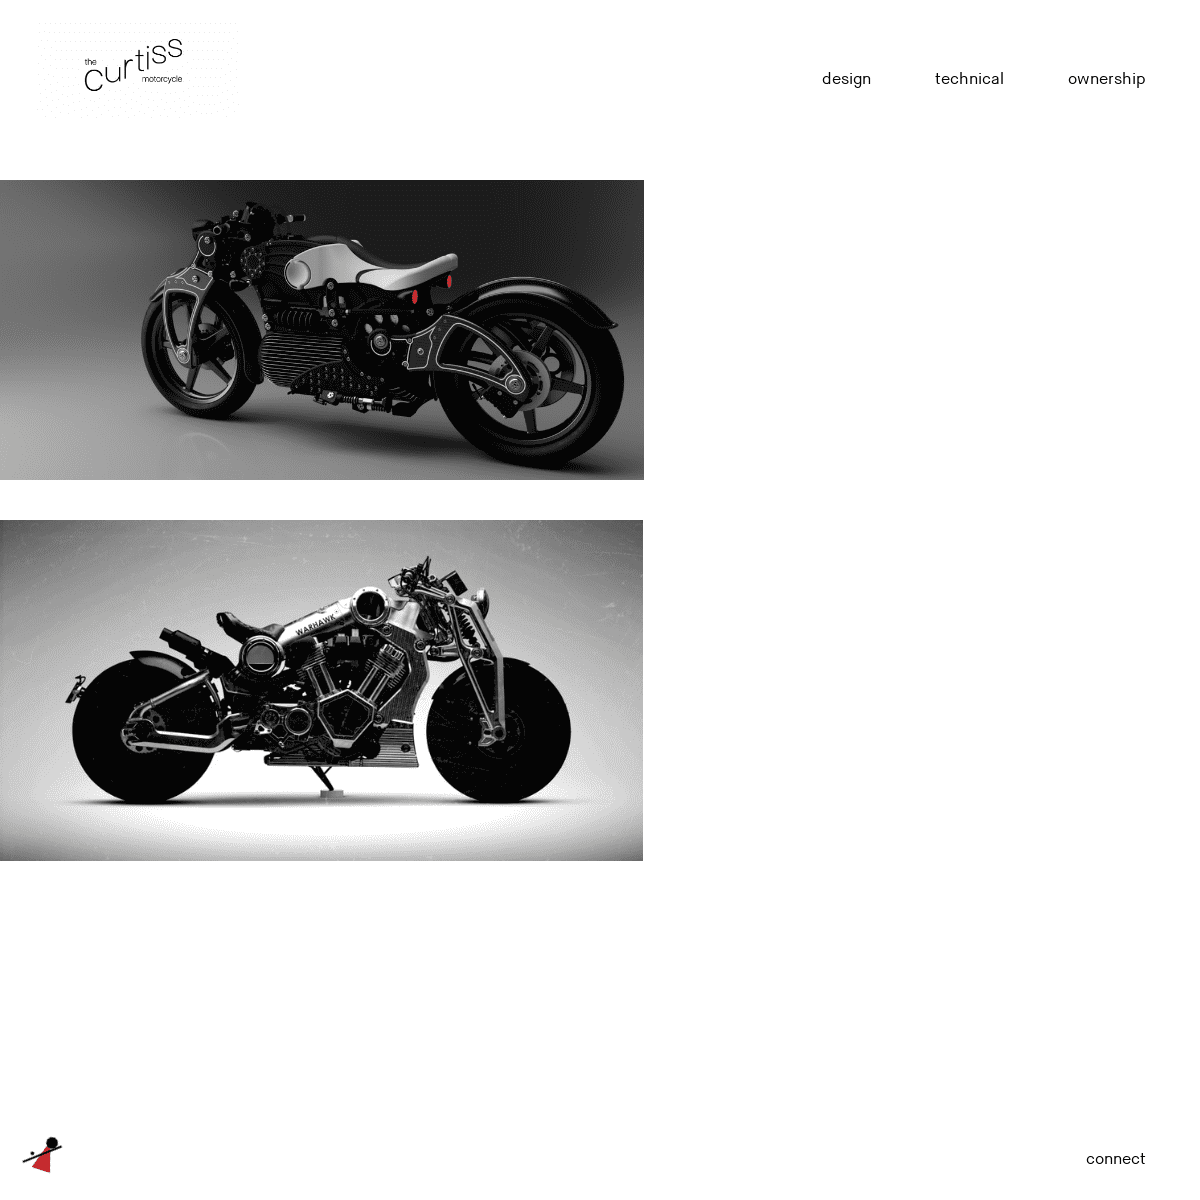 A complete backup of curtissmotorcycles.com